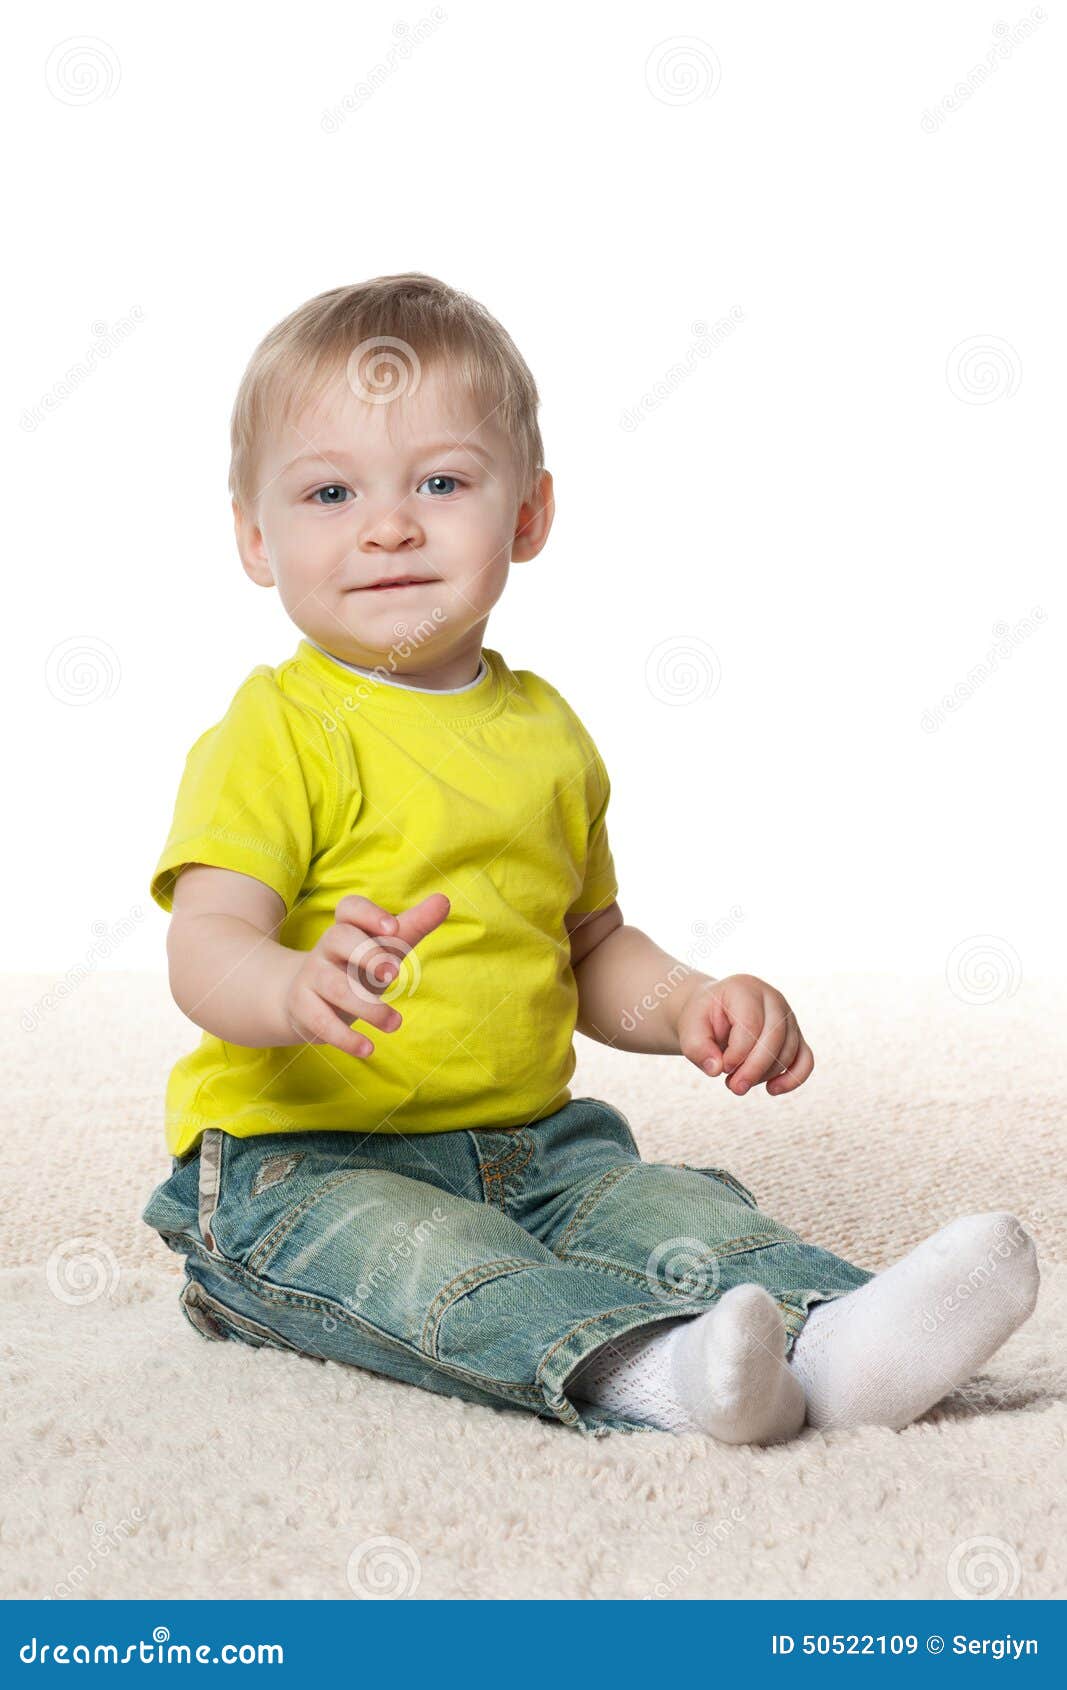 Smiling Baby Boy on the Carpet Stock Image - Image of pleasure, cute ...